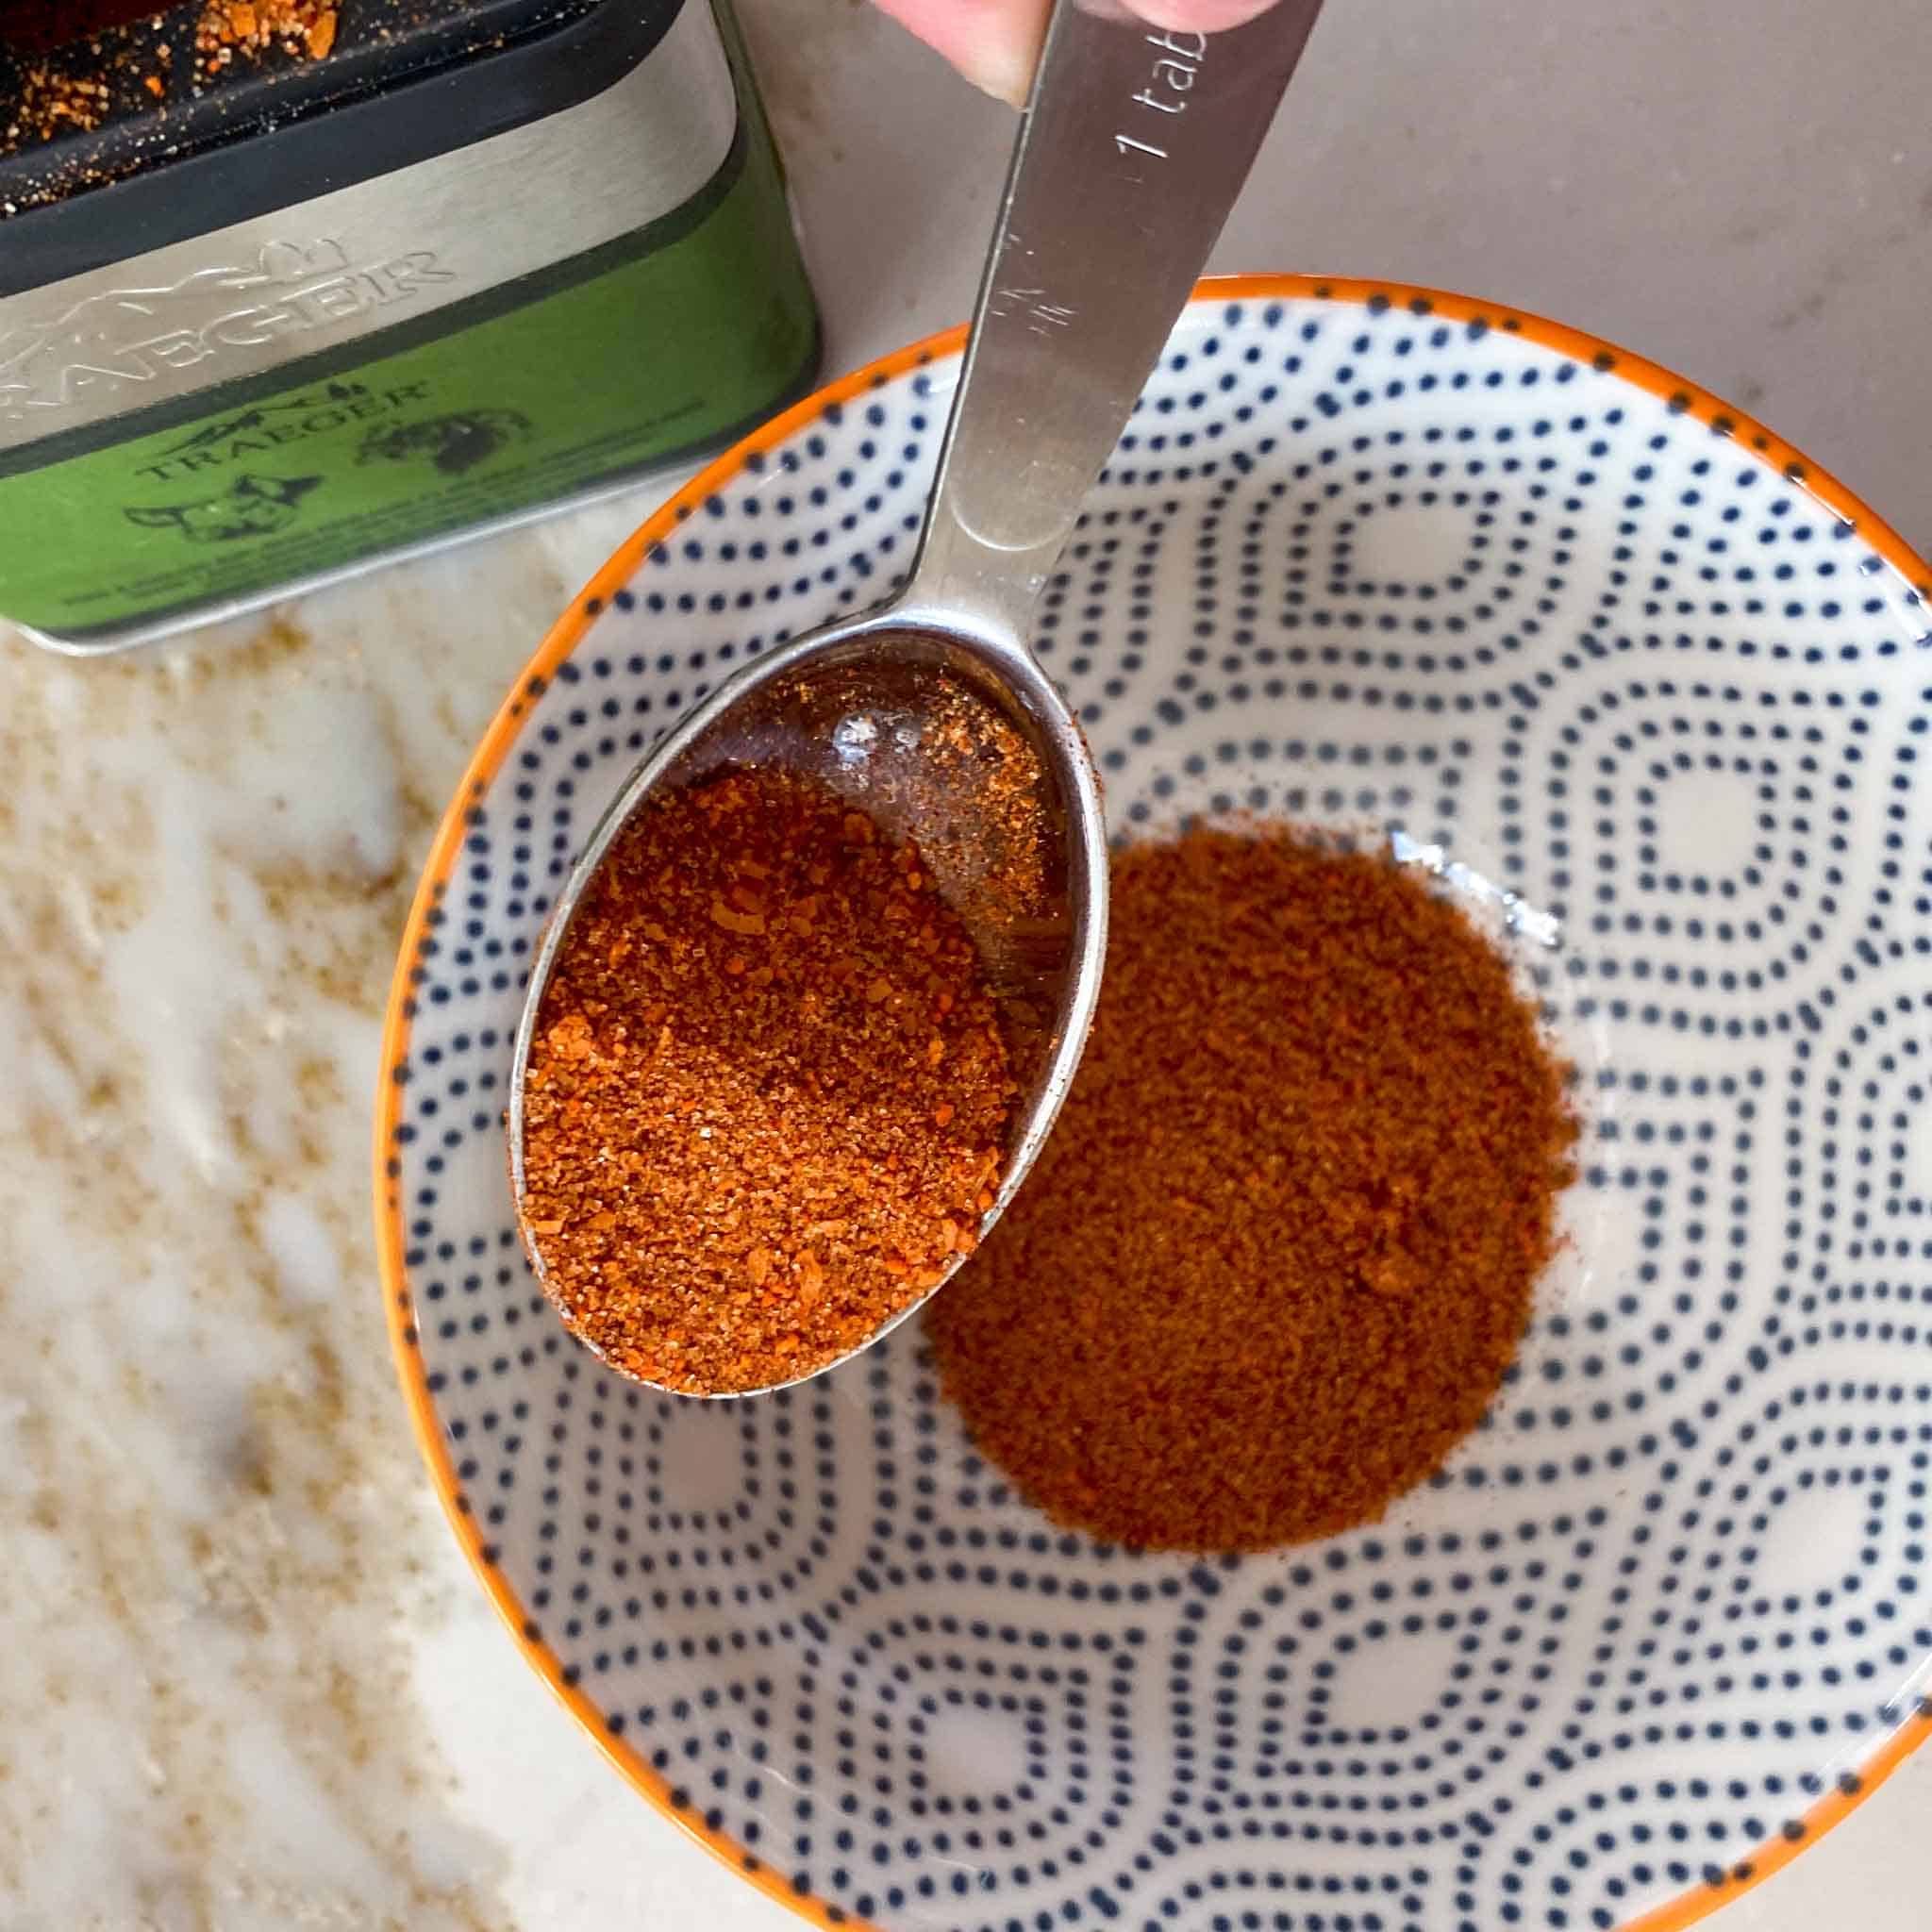 Traeger Pork + Poultry Rub being spooned into a bowl.